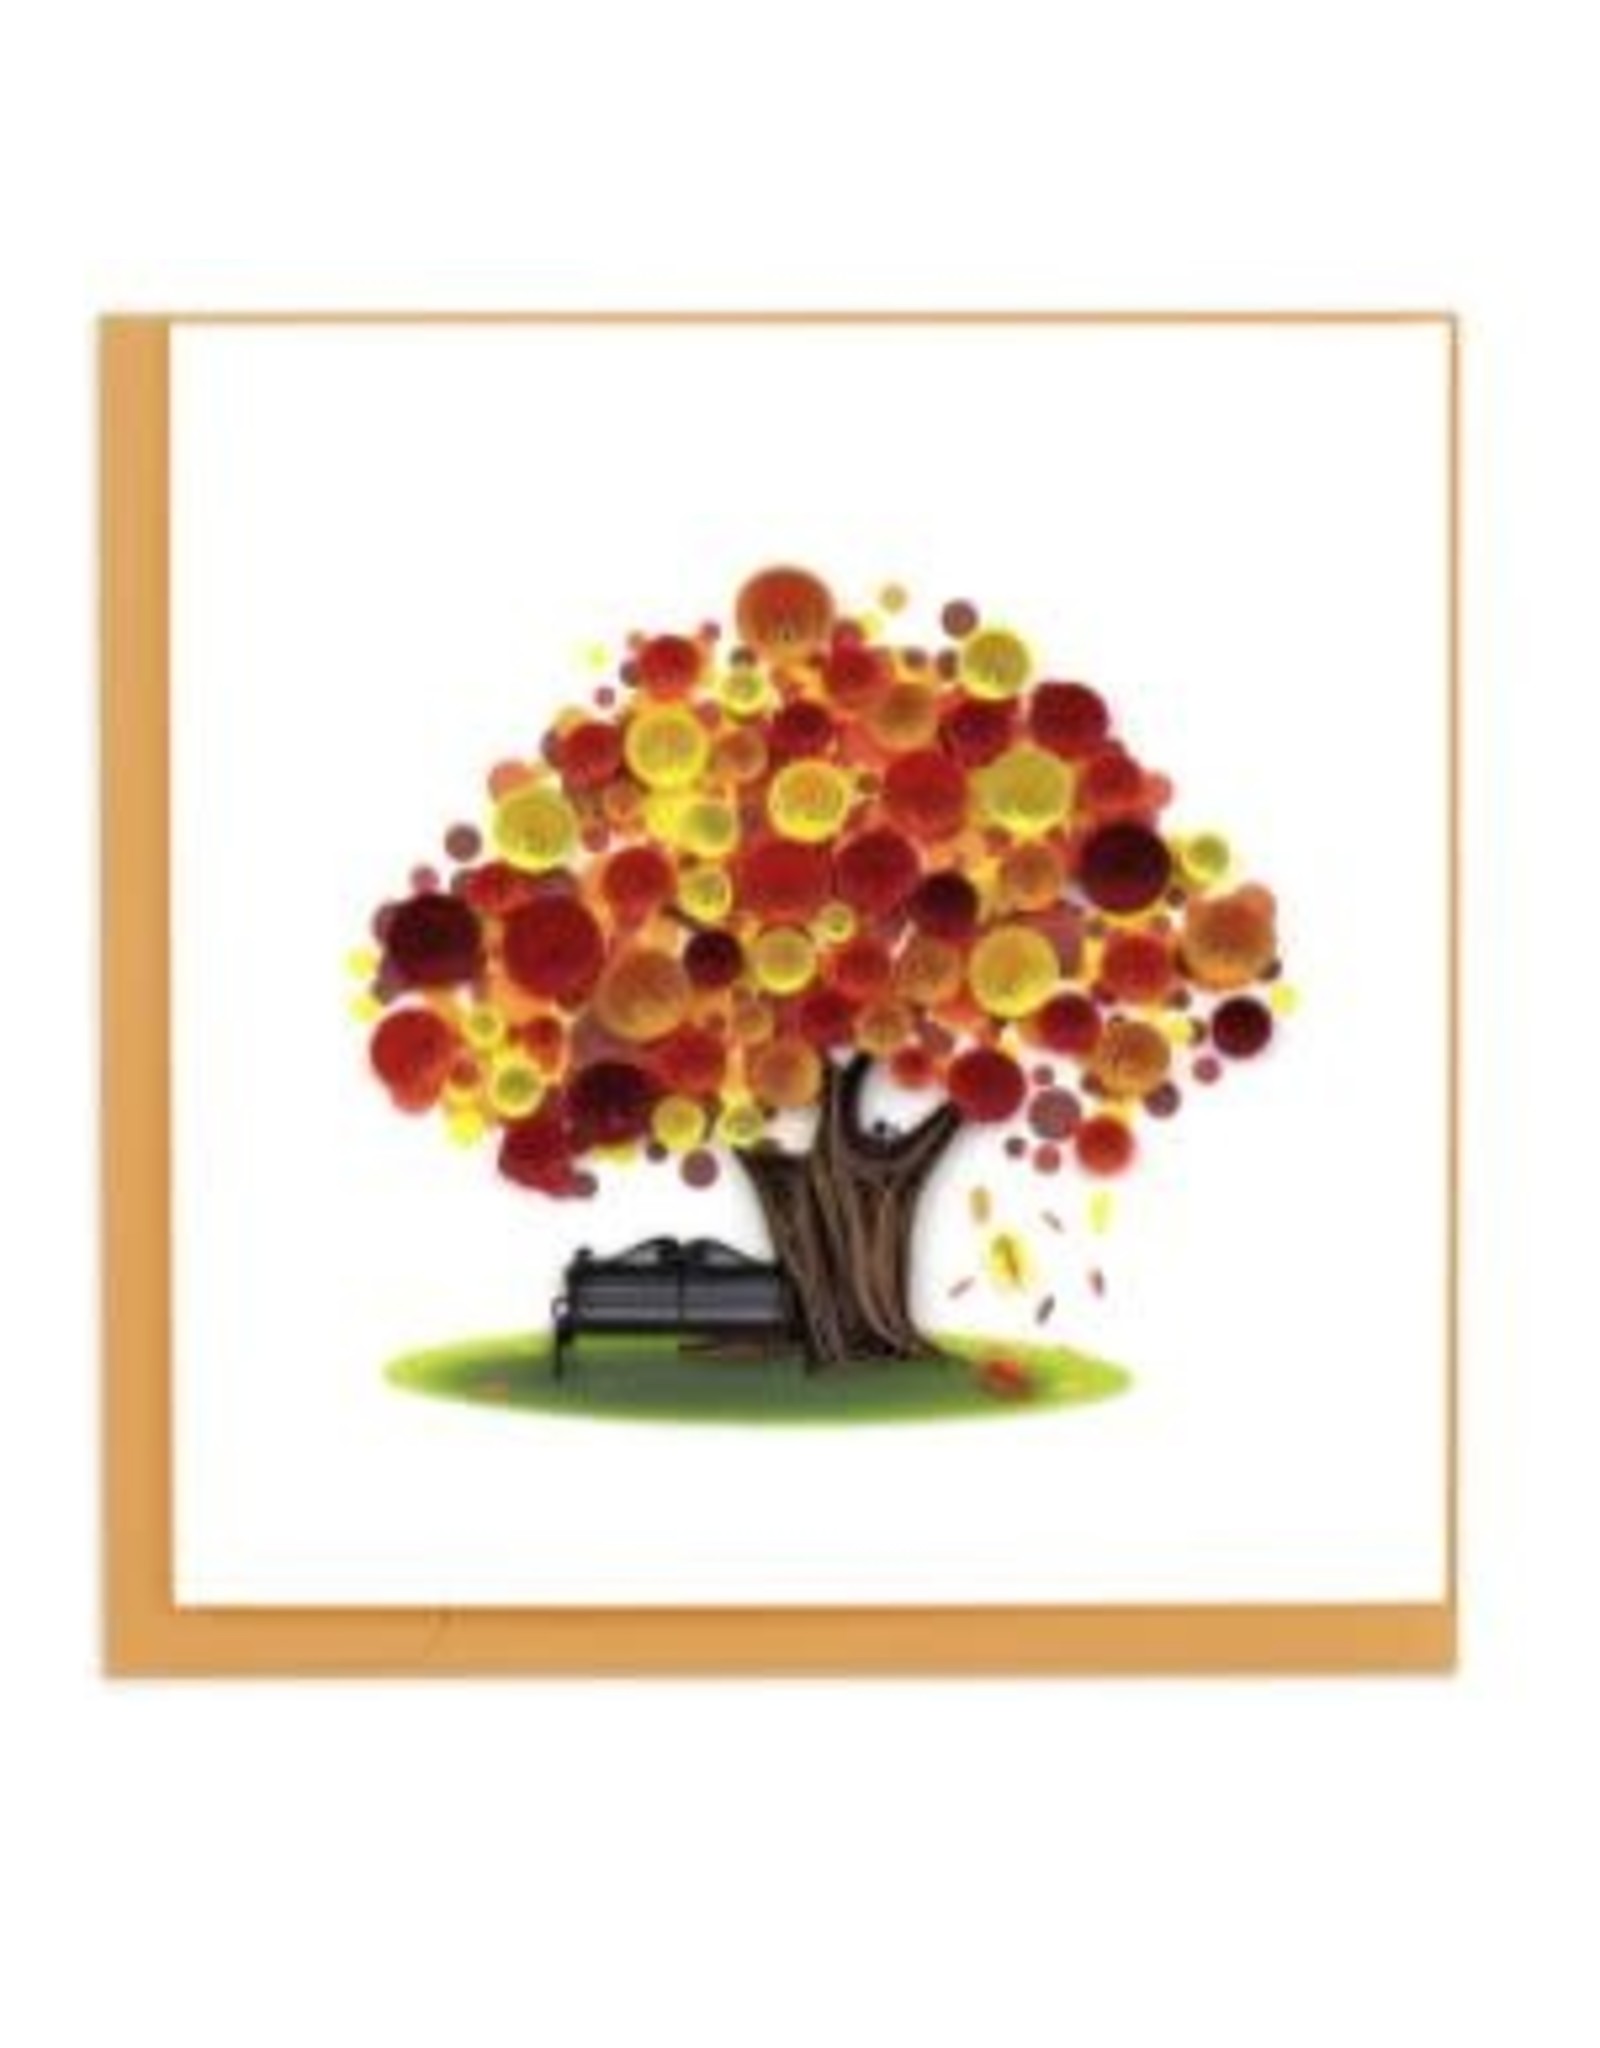 Quilling Card Lg- Autumn Tree